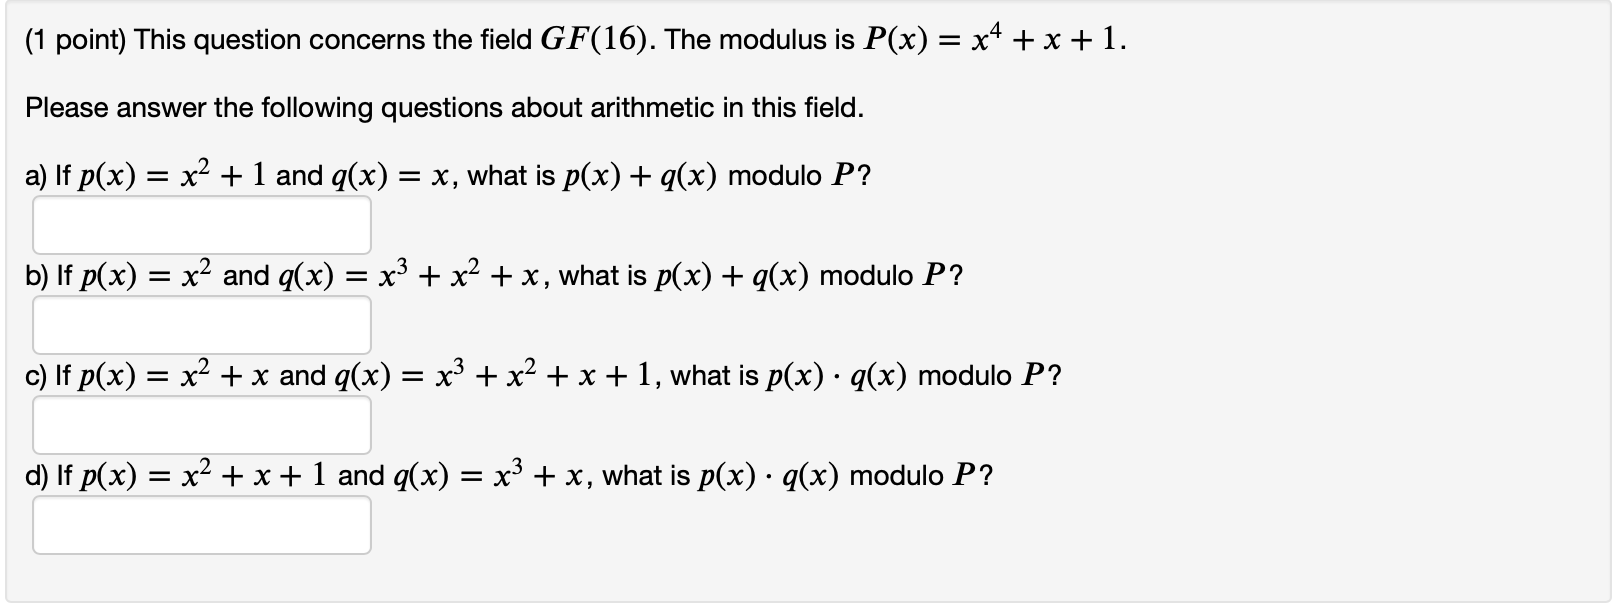 (1 point) This question concerns the field GF(16). The modulus is P(x) = x + x + 1. Please answer the